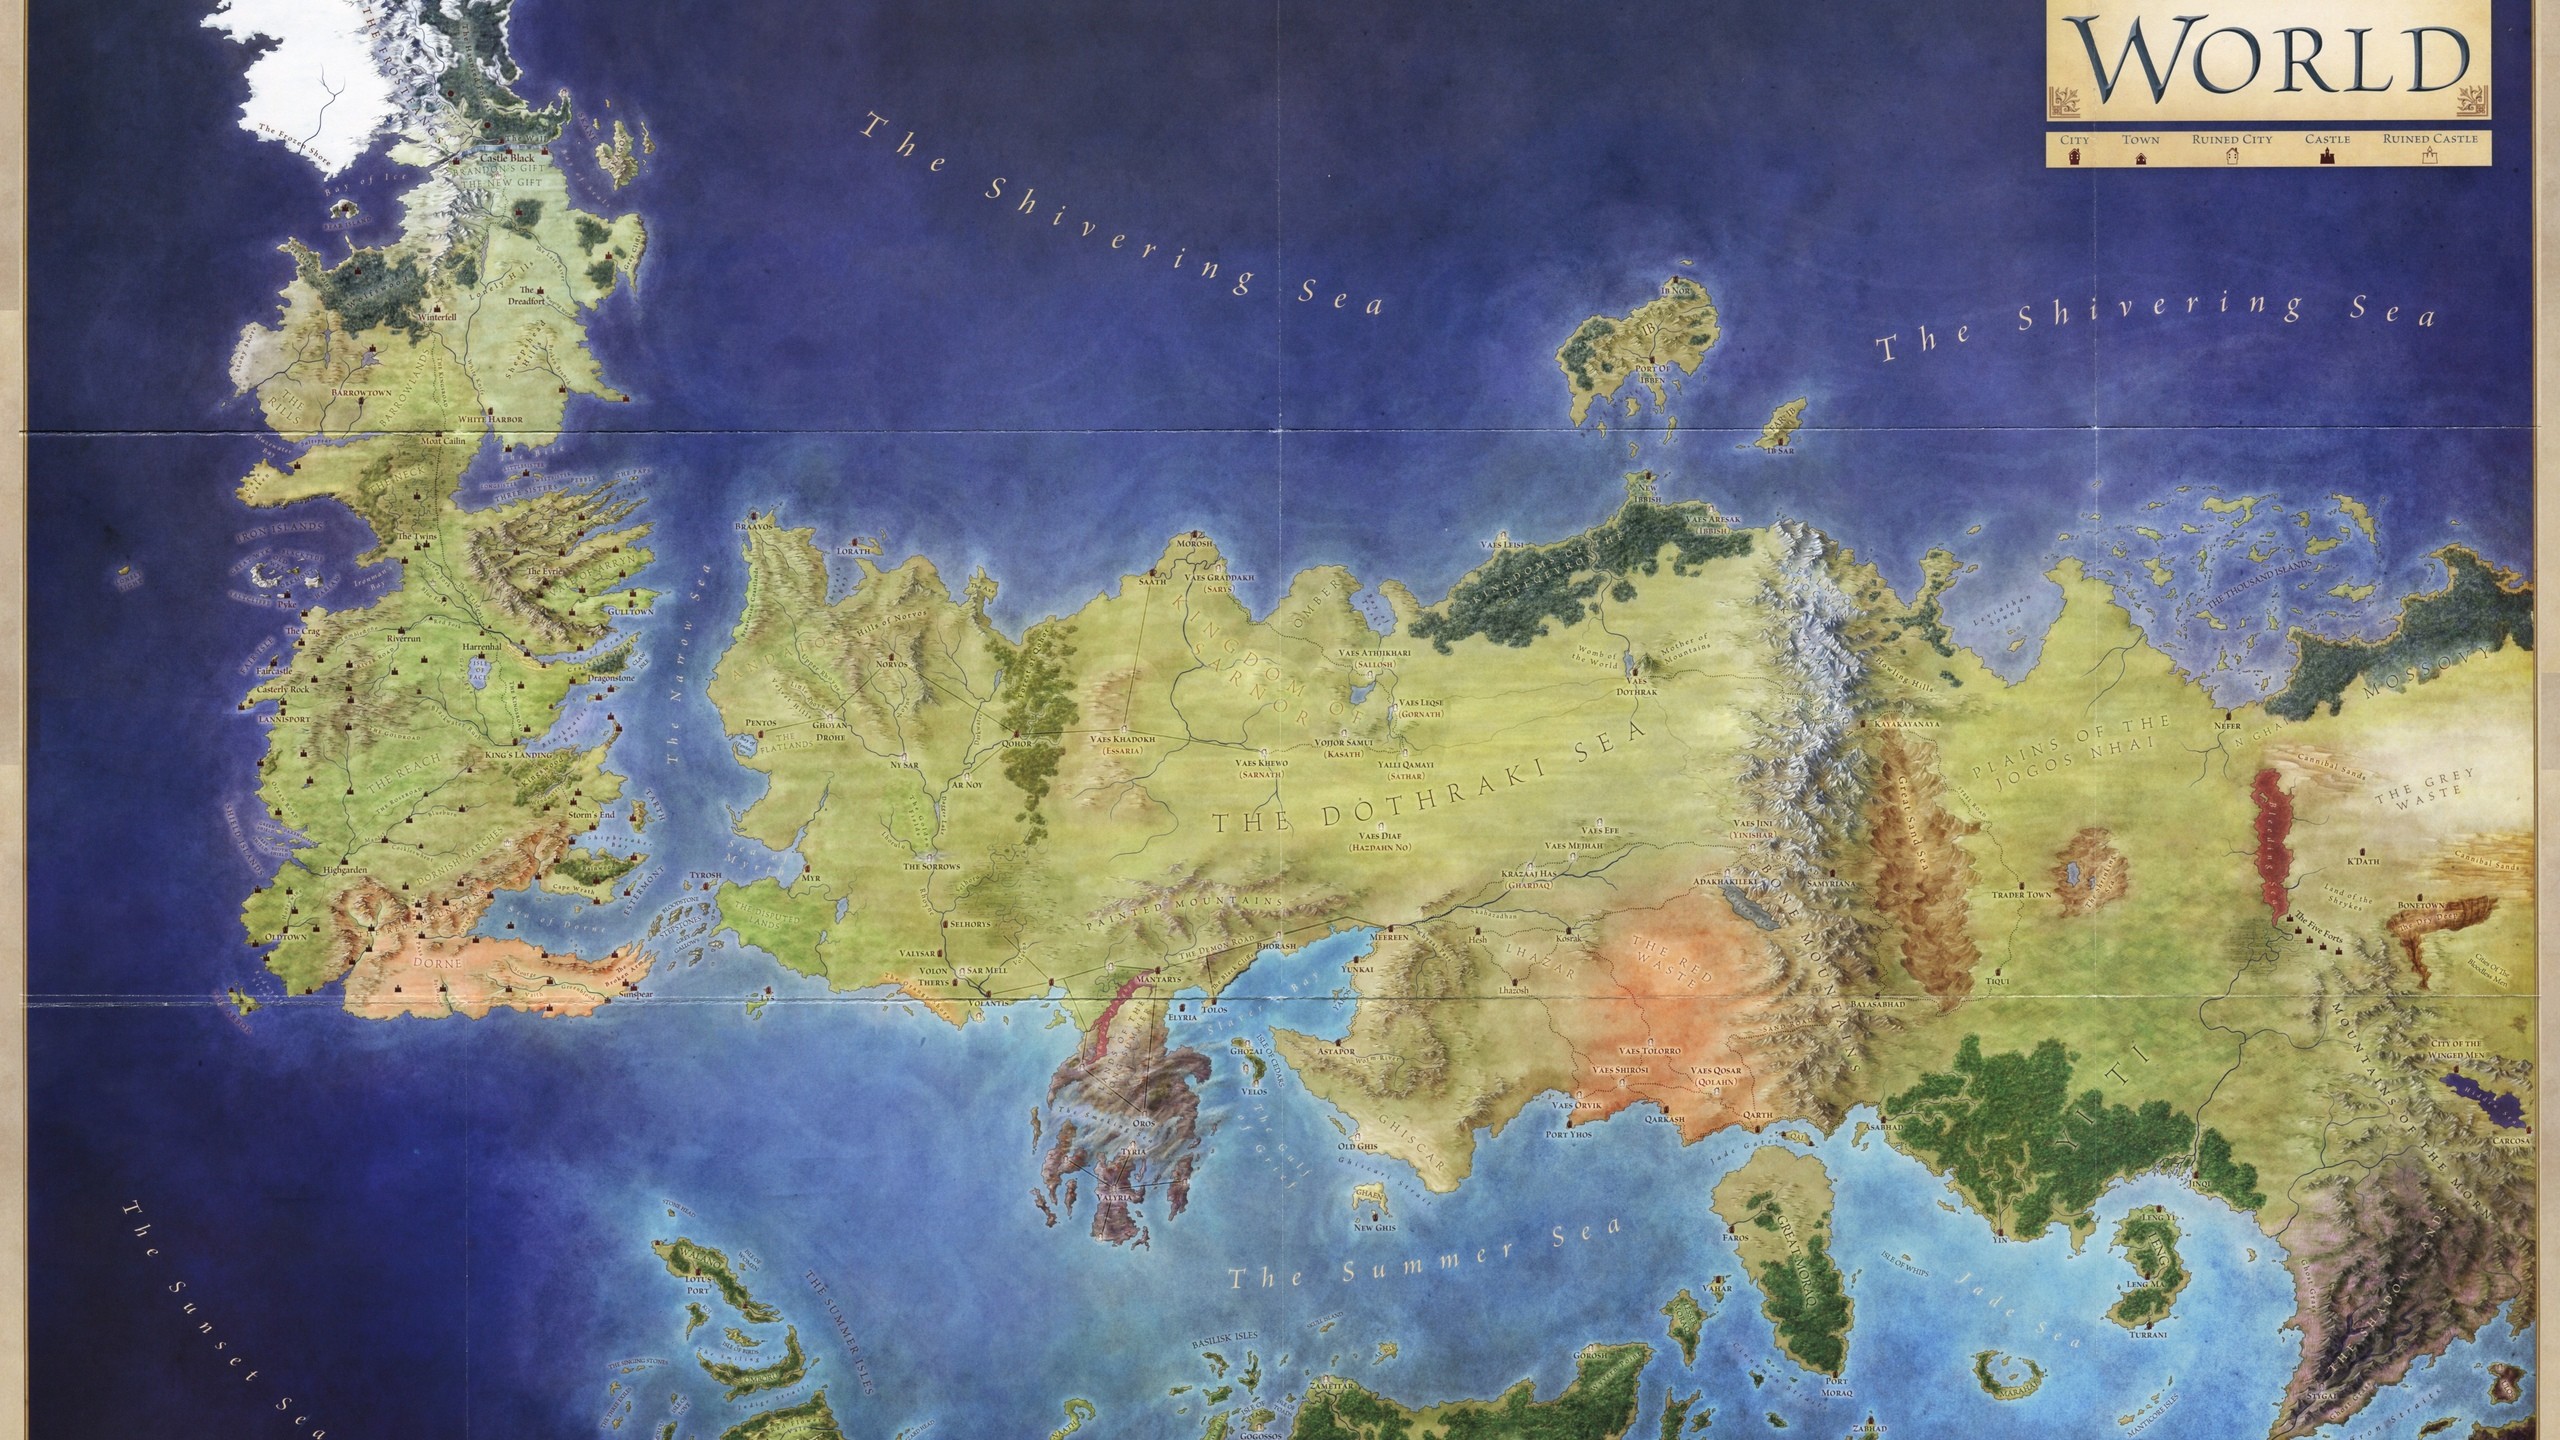 If you buy the Lands of Ice and Fire it comes with a colour version of this map